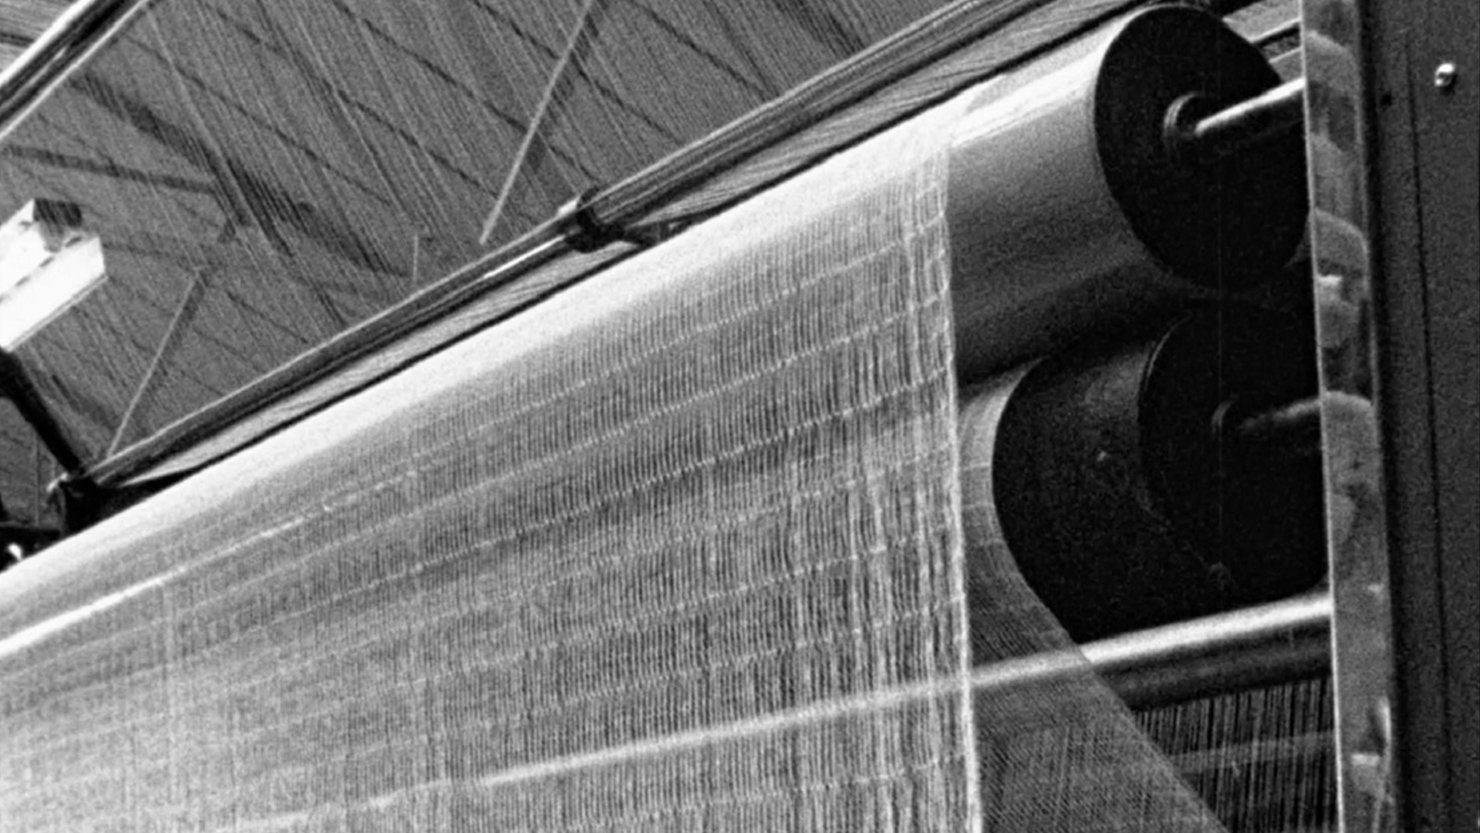 A black and white image of a textile loom